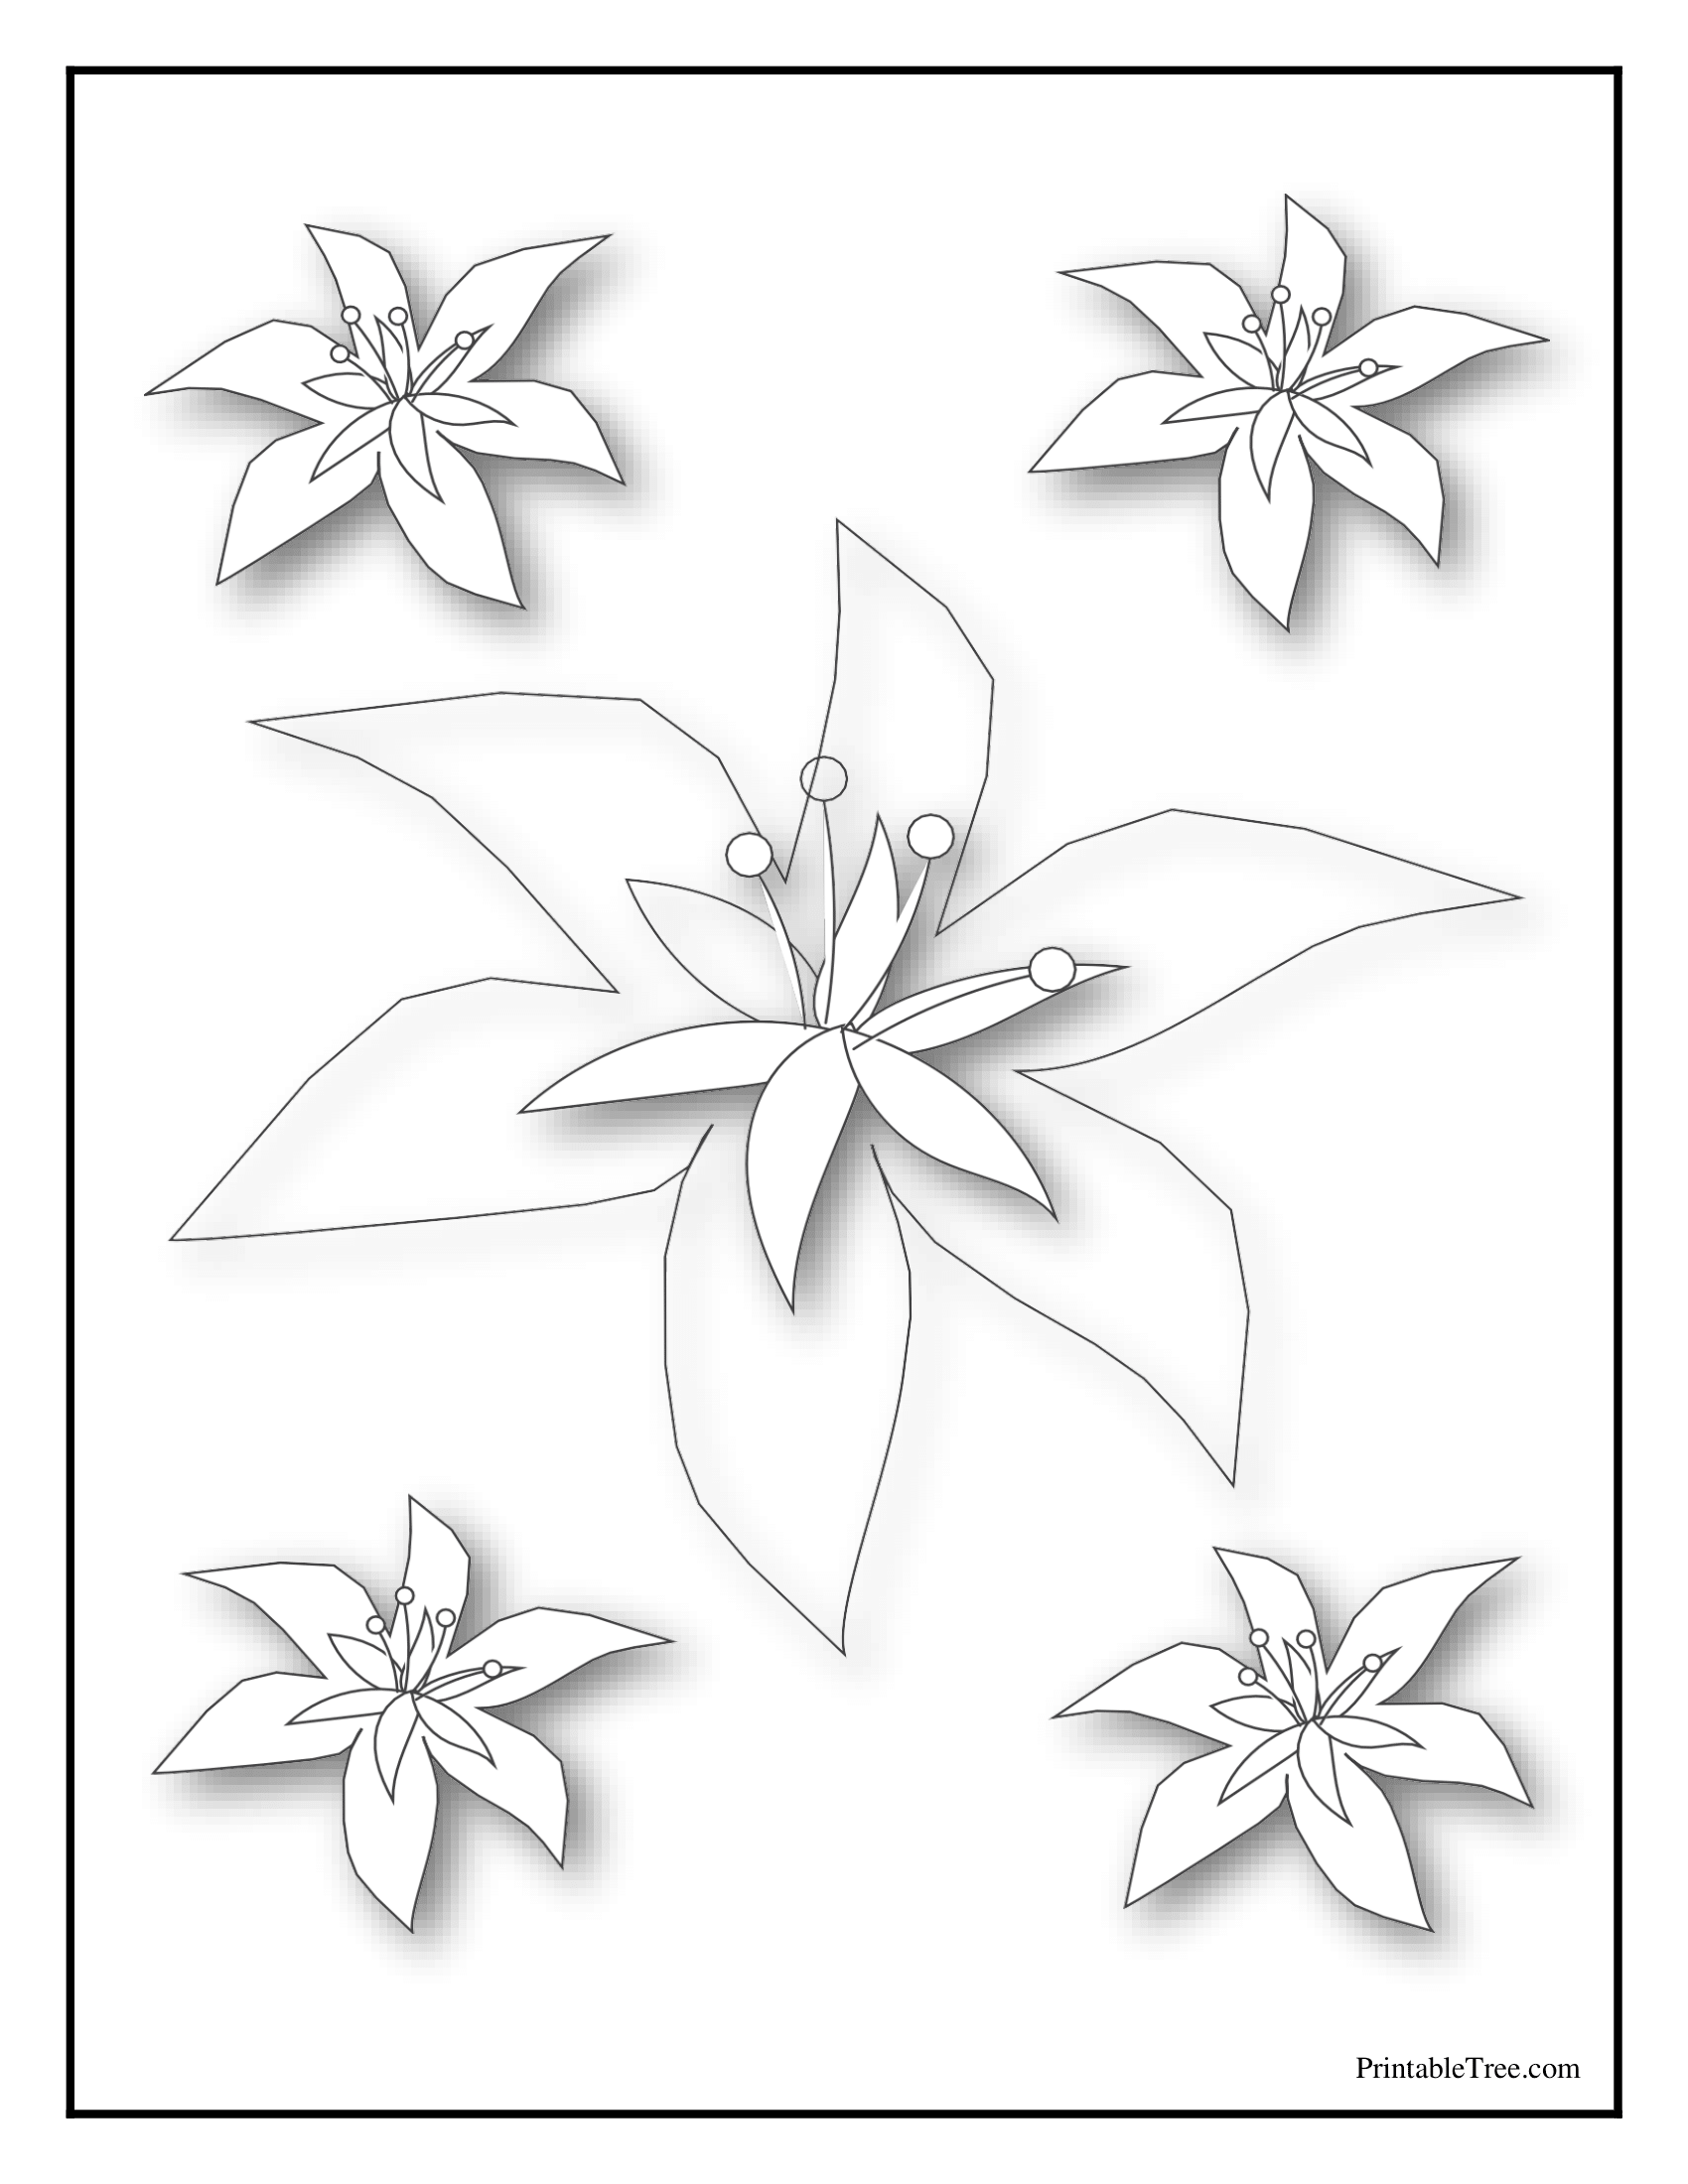 Free printable flower coloring pages pdf for kids and adults